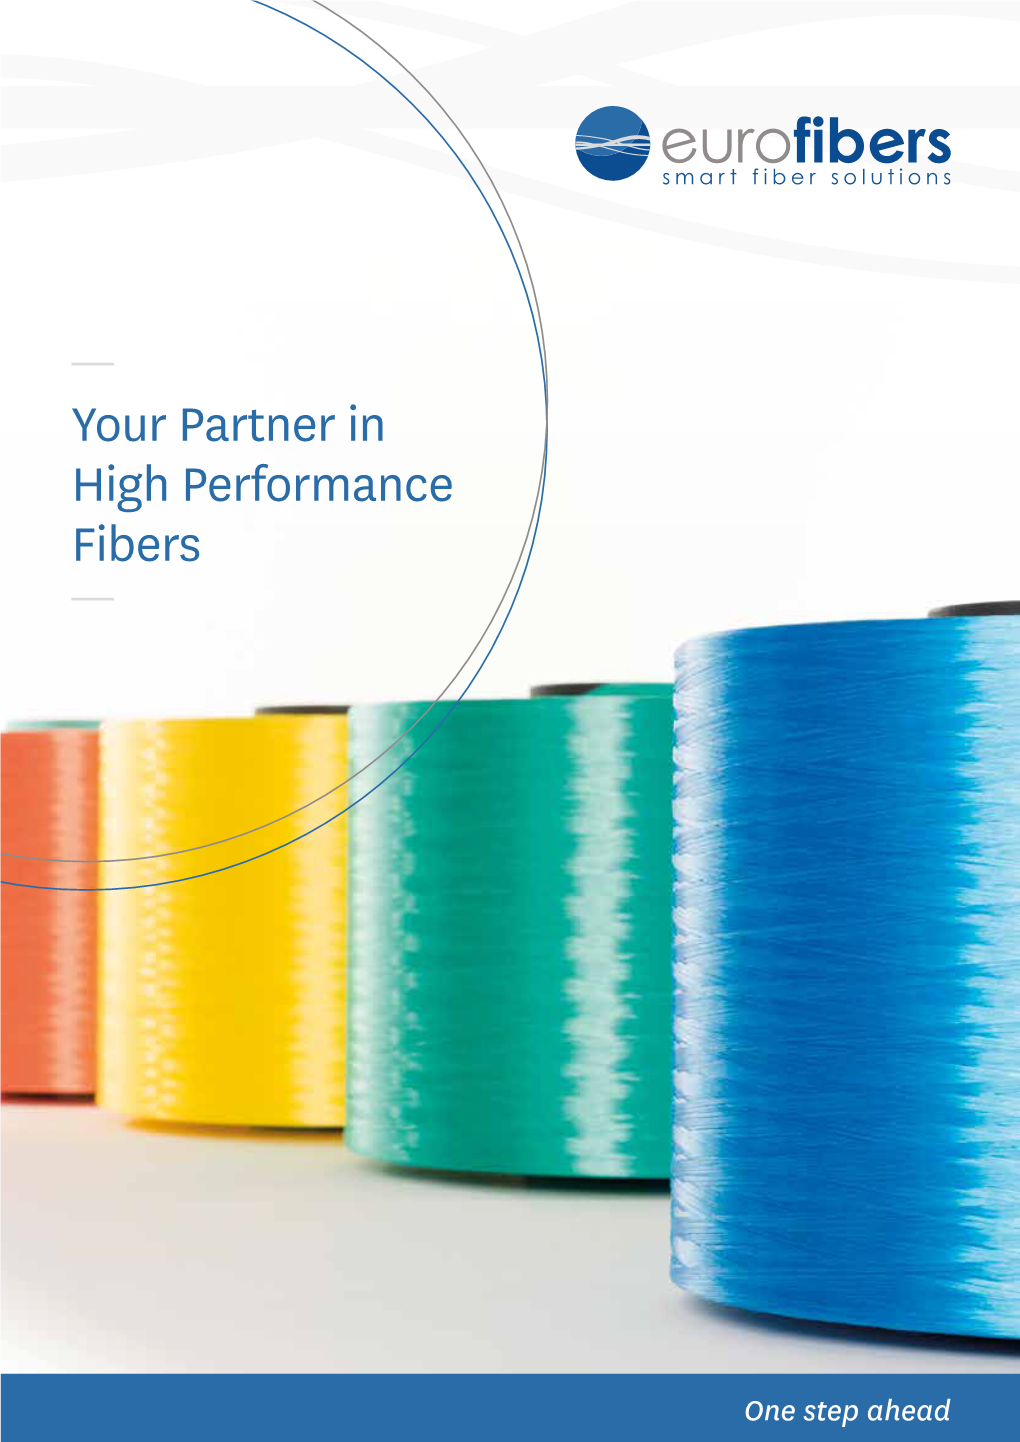 Your Partner in High Performance Fibers